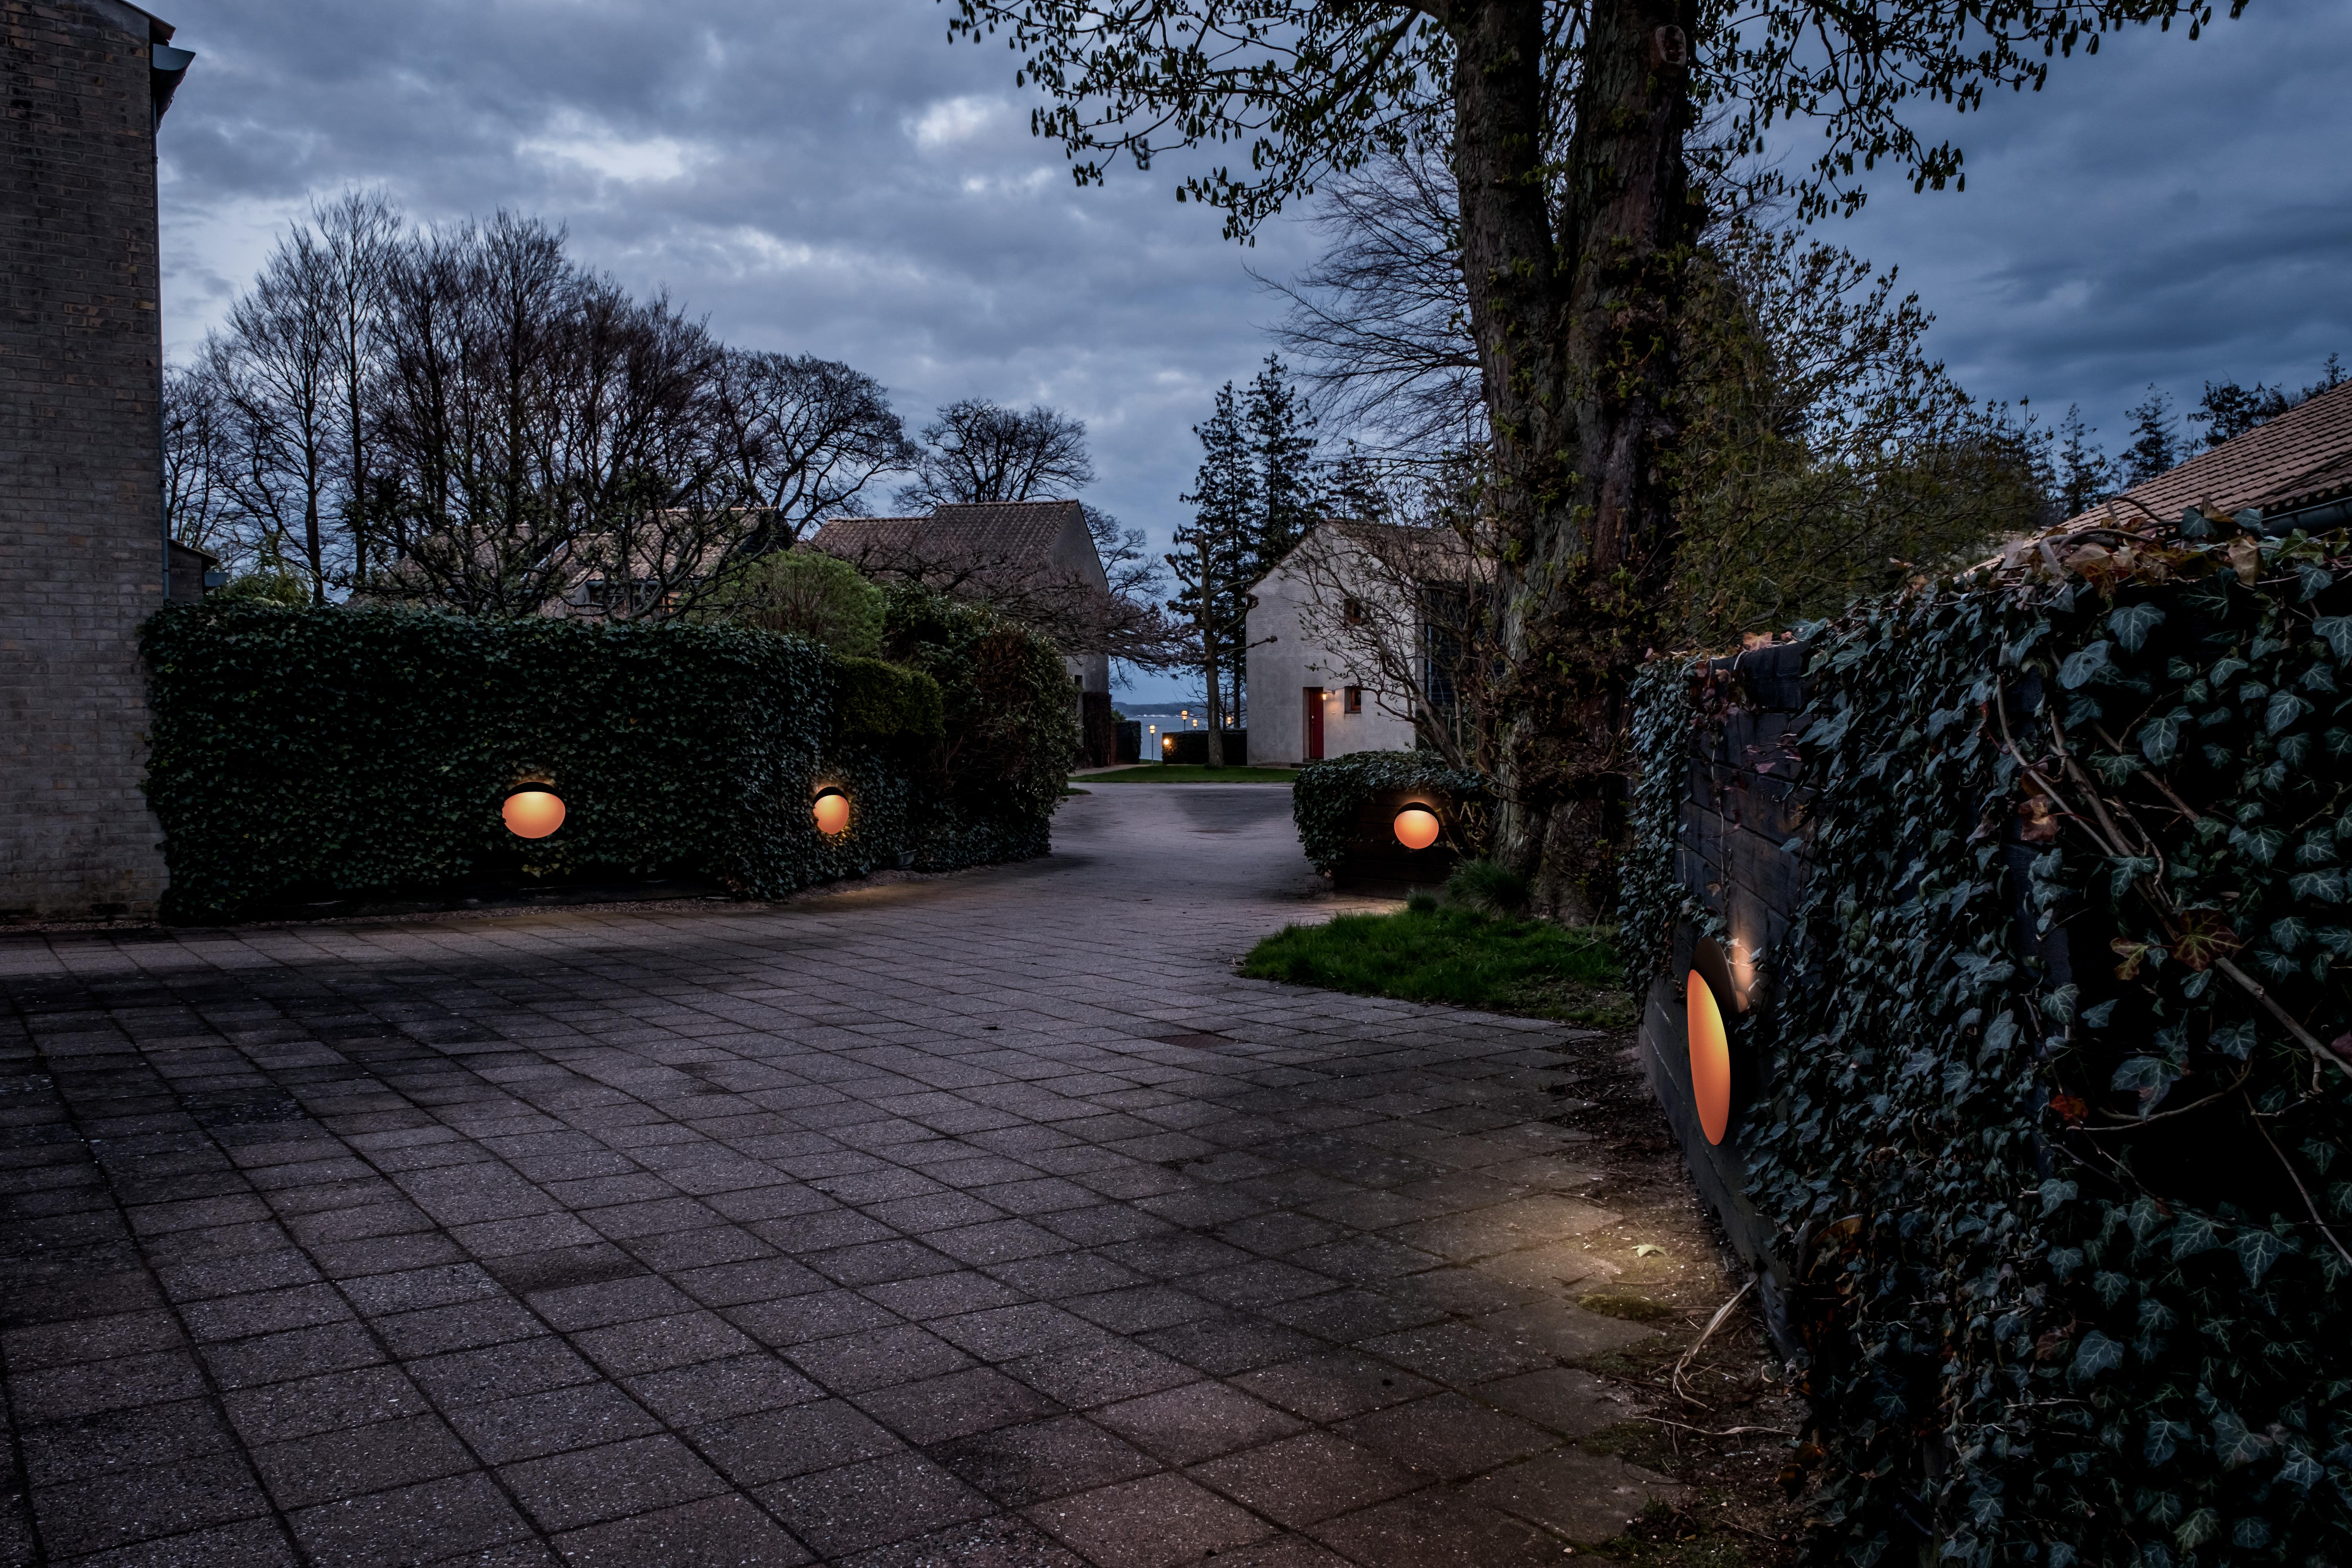 Large 'Flindt' Indoor or Outdoor Wall Light in Black for Louis Poulsen.

A circular, wall-mounted fixture that brings bold, sculptural illumination to both indoor and outdoor spaces. The slim, elliptical lamp has a floating appearance that, paired